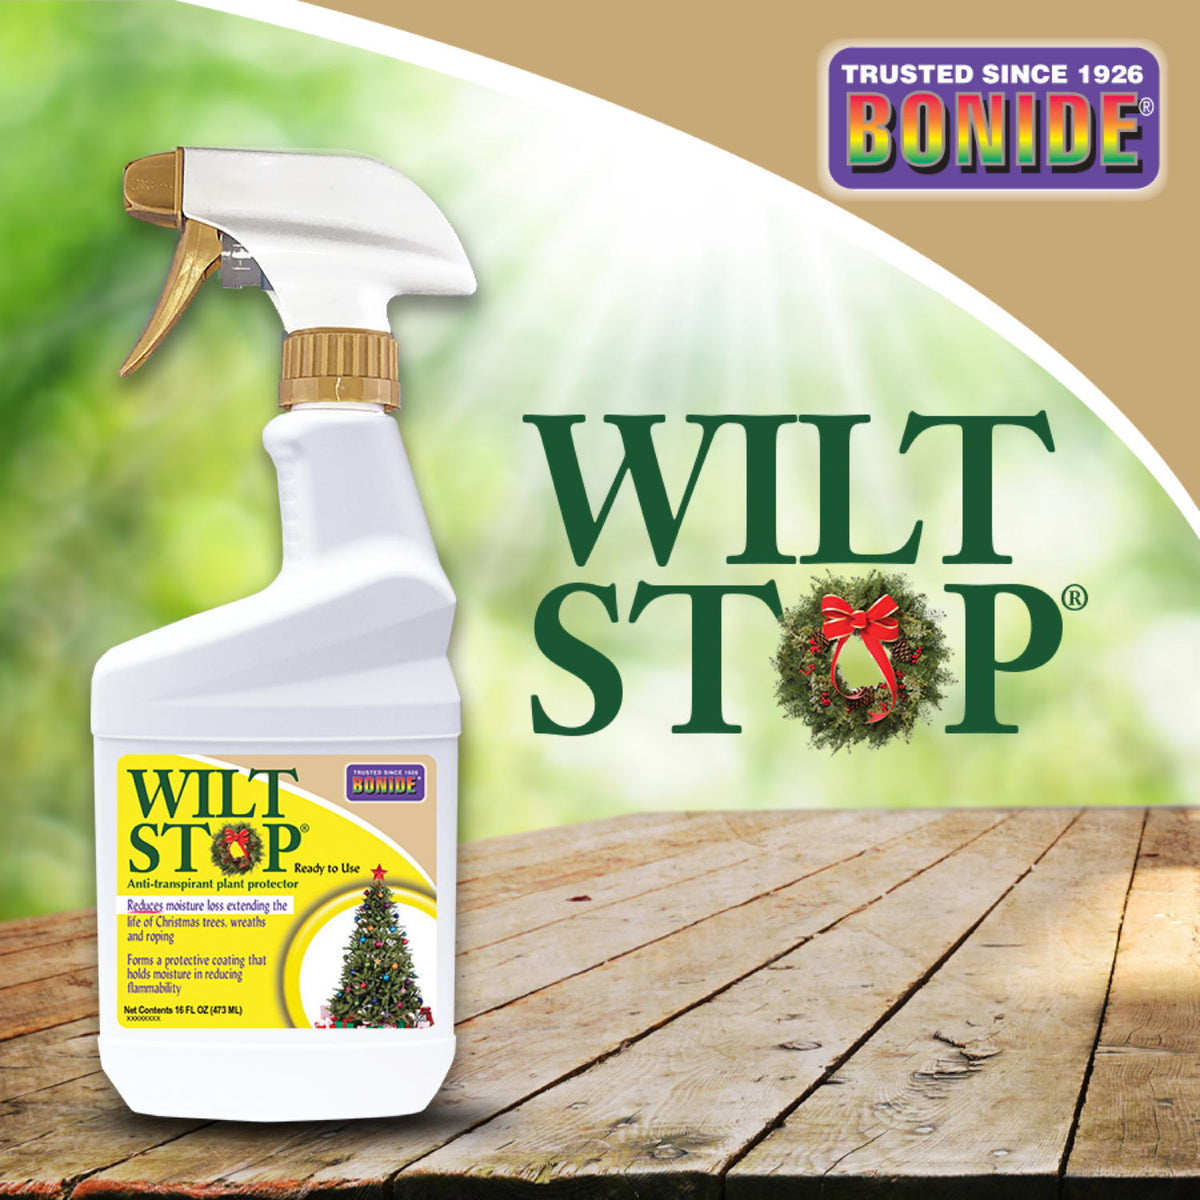 Bonide -Wilt Stop contains Pinene Protects against Drought